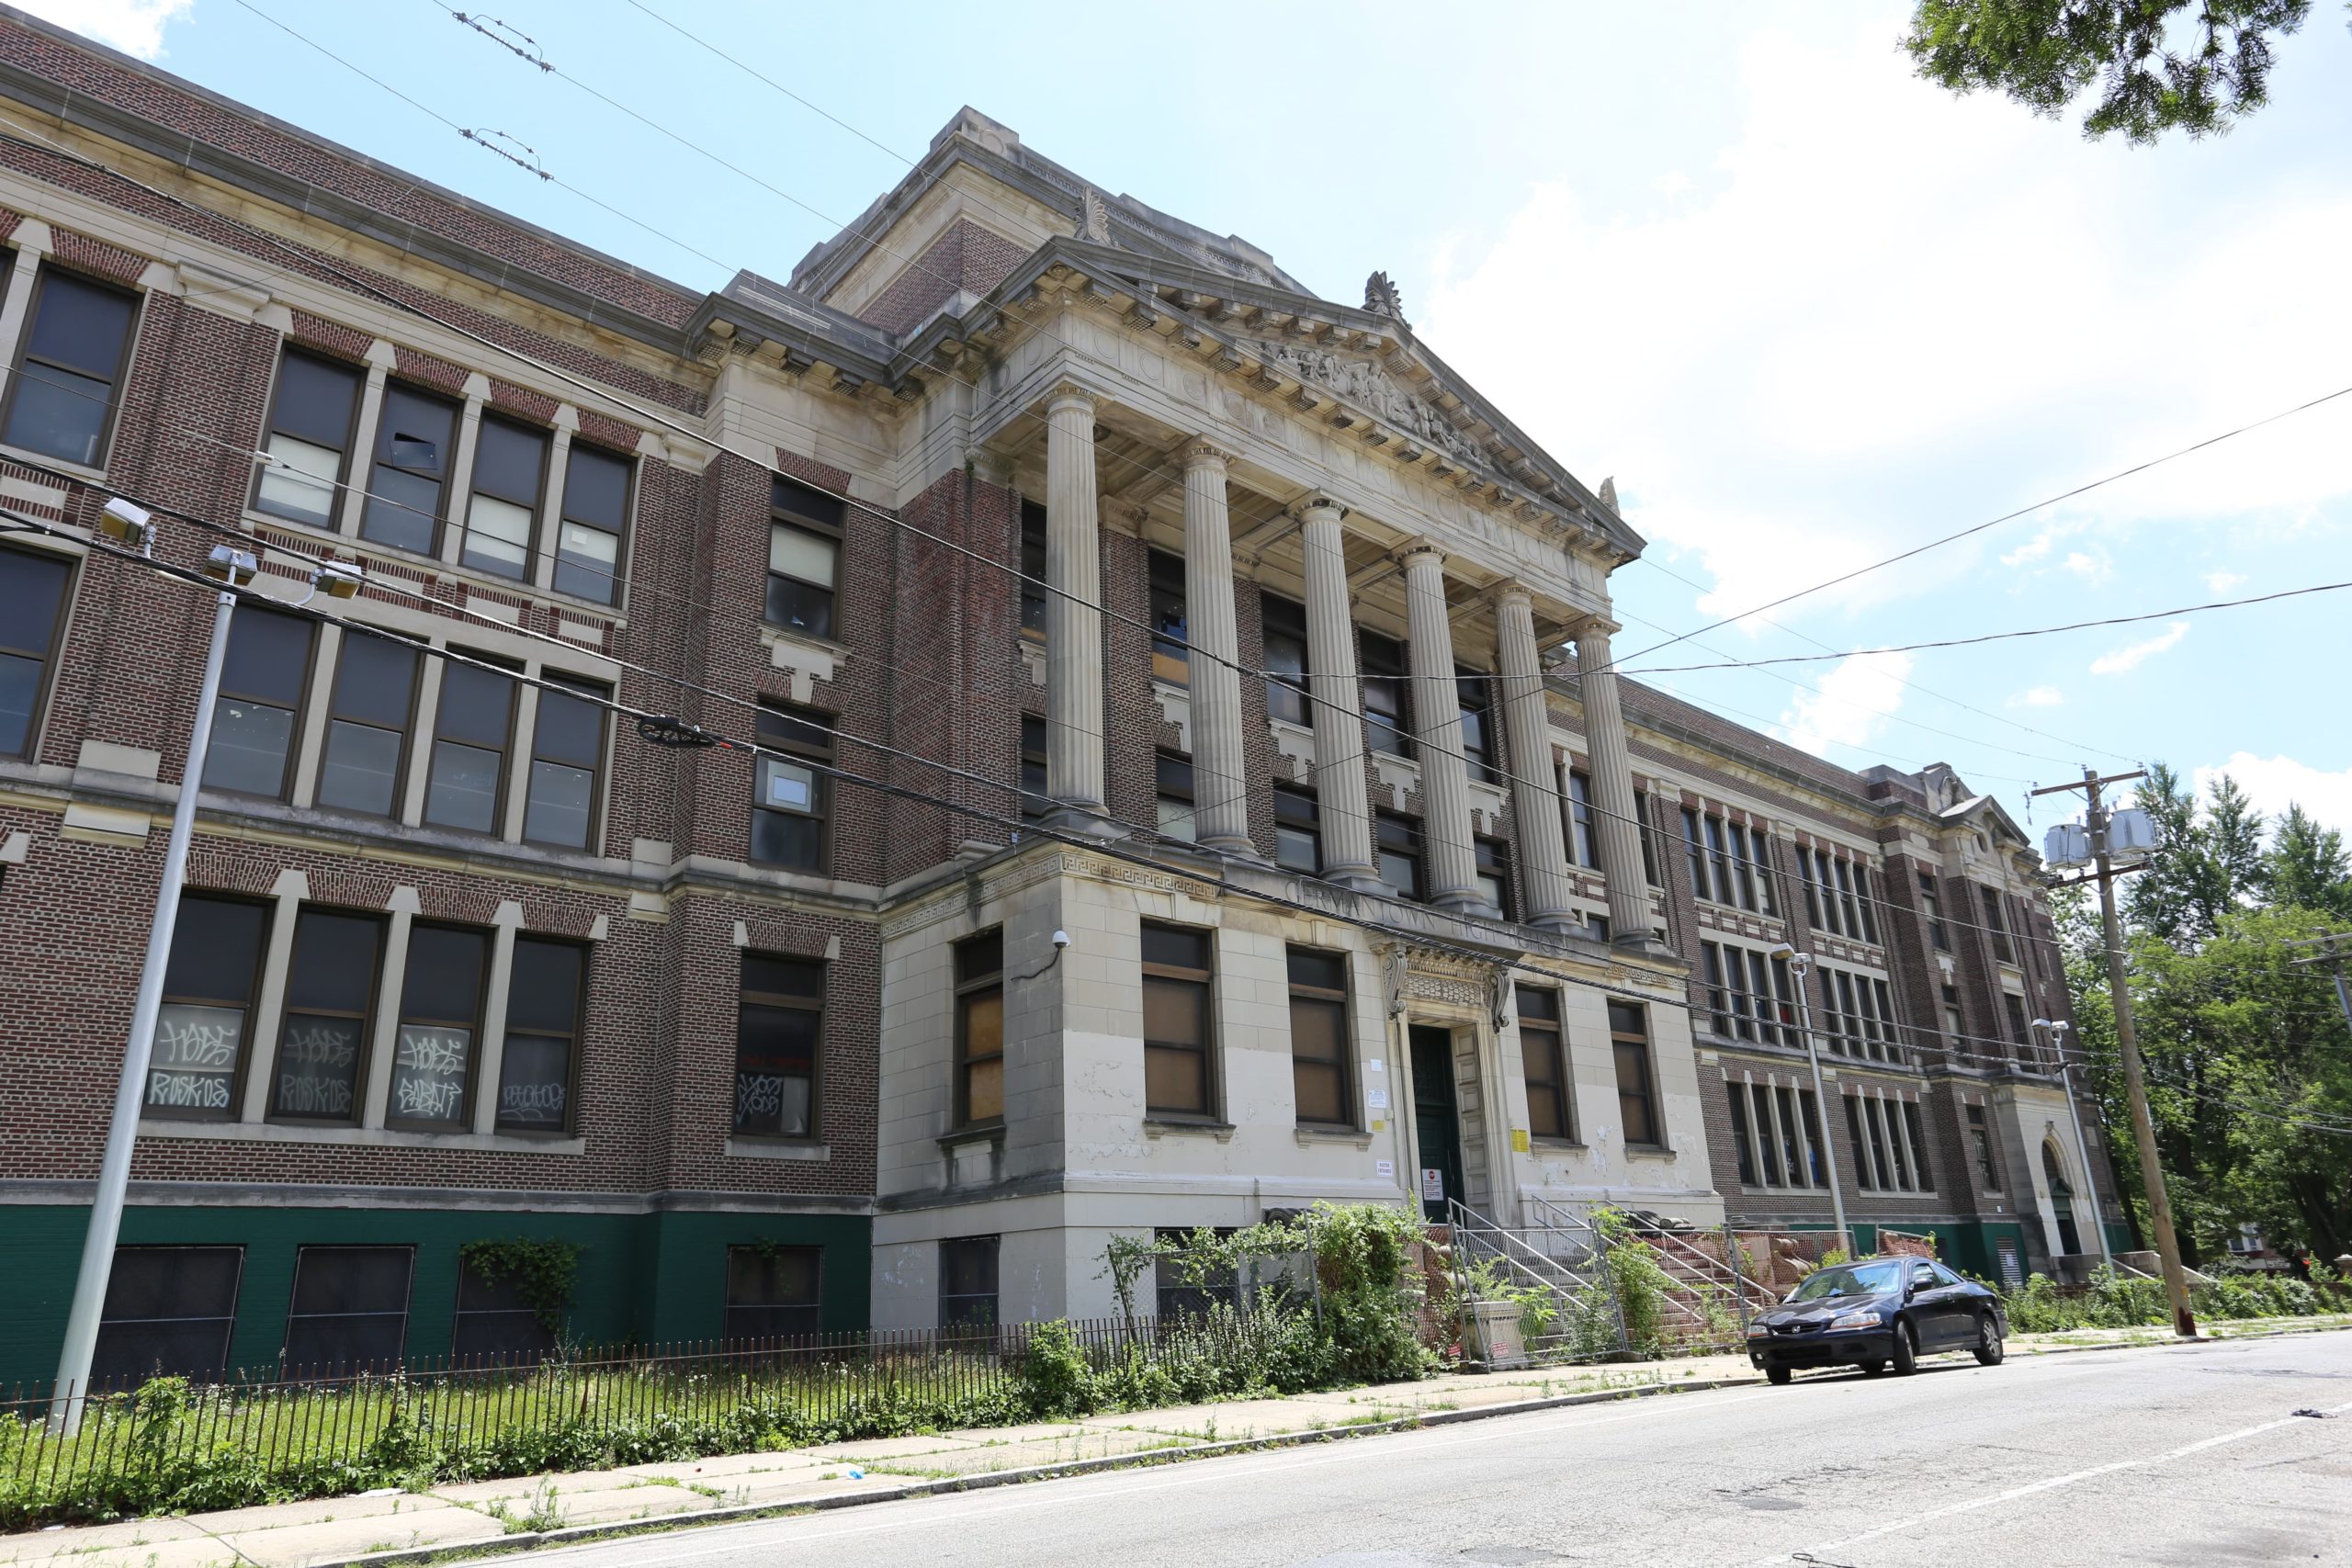 352 Units Proposed within Historic Germantown High School Buildings